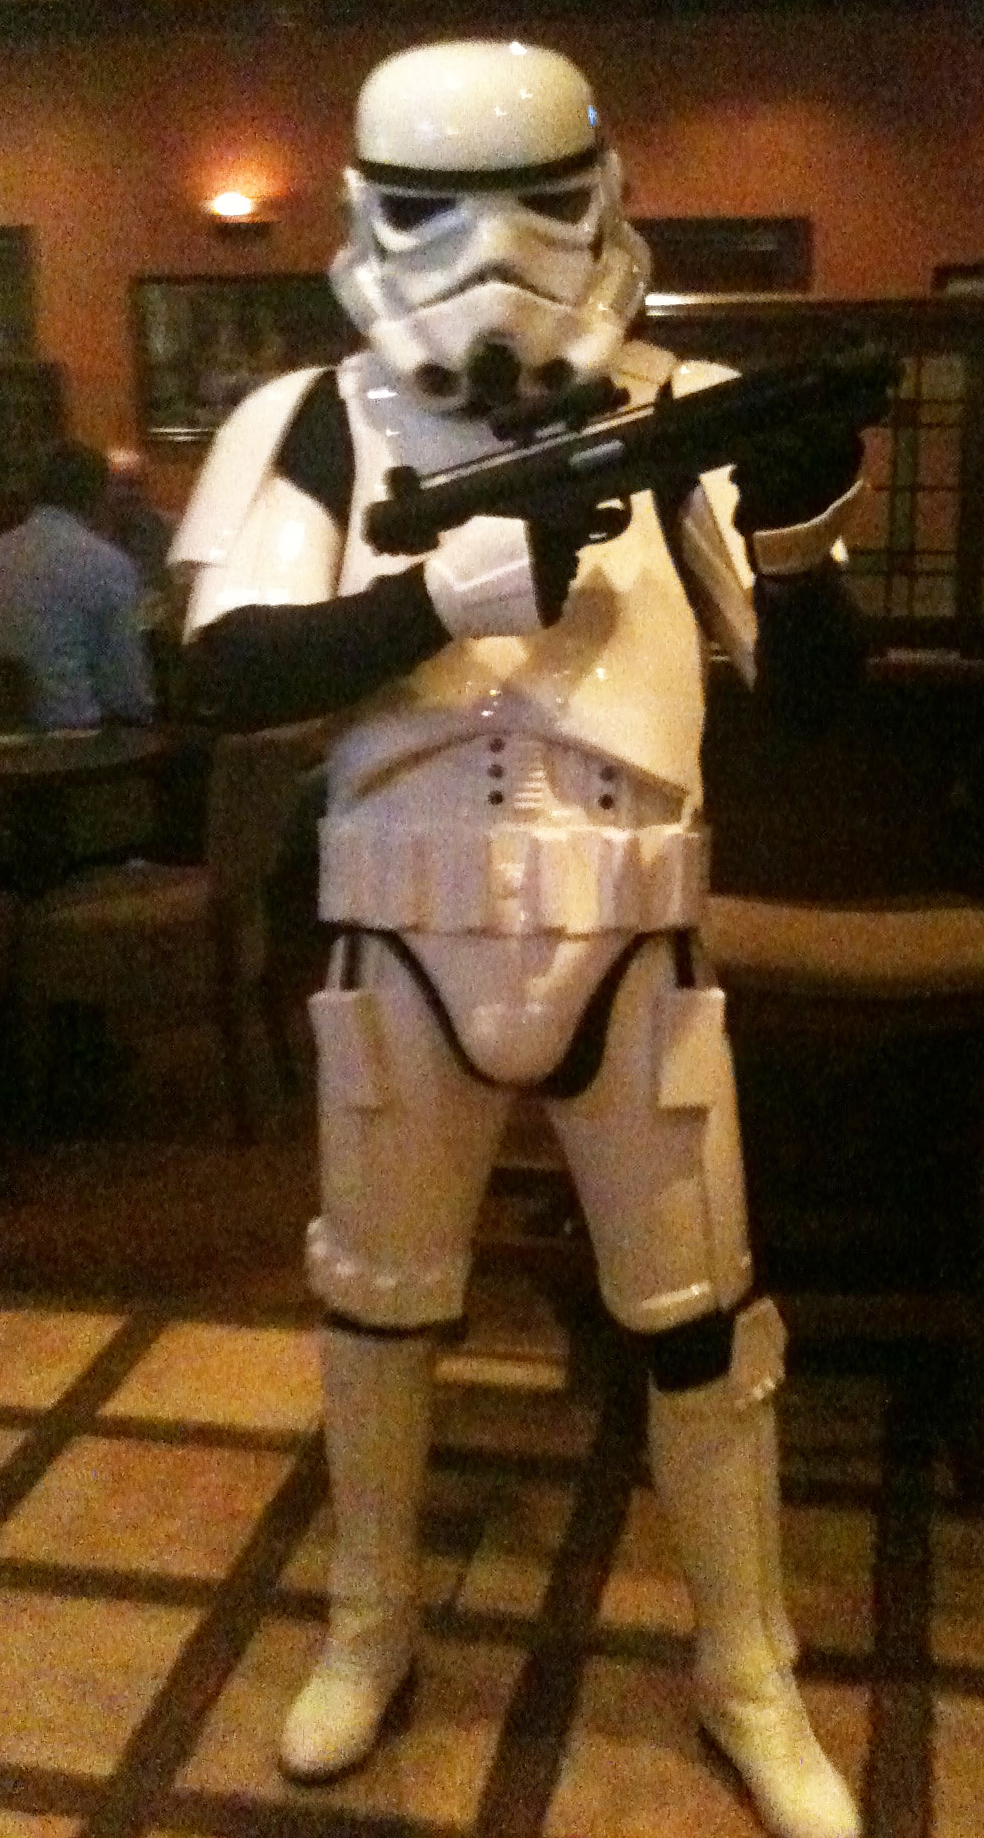 Stormtrooper Armor Review from Julianne